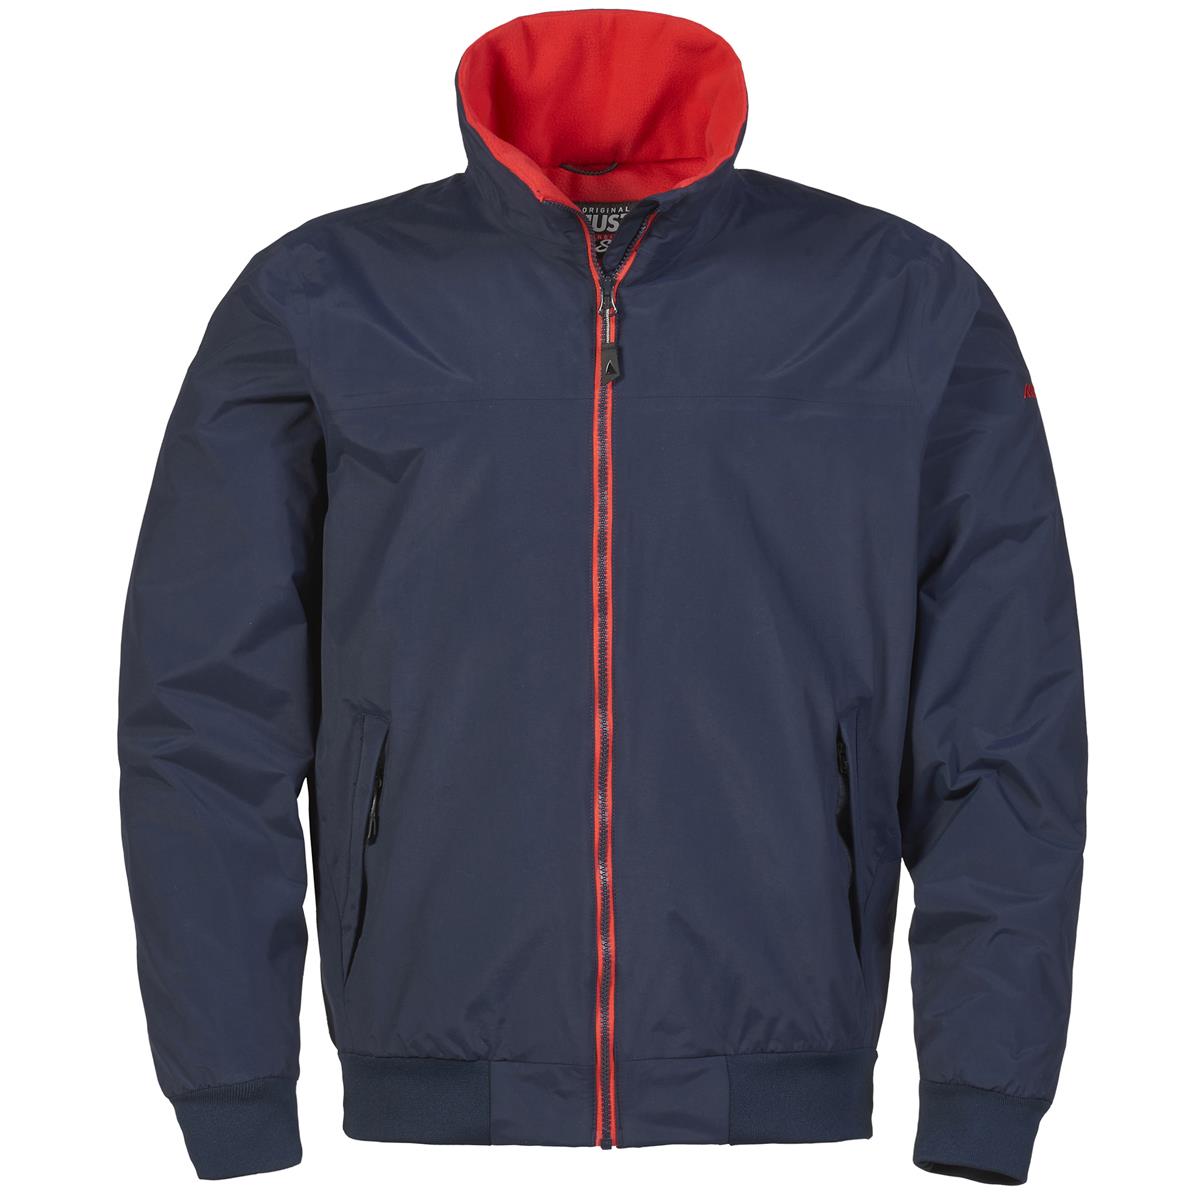 What colors & sizes are available for the Musto Snug Blouson Jacket 2.0?